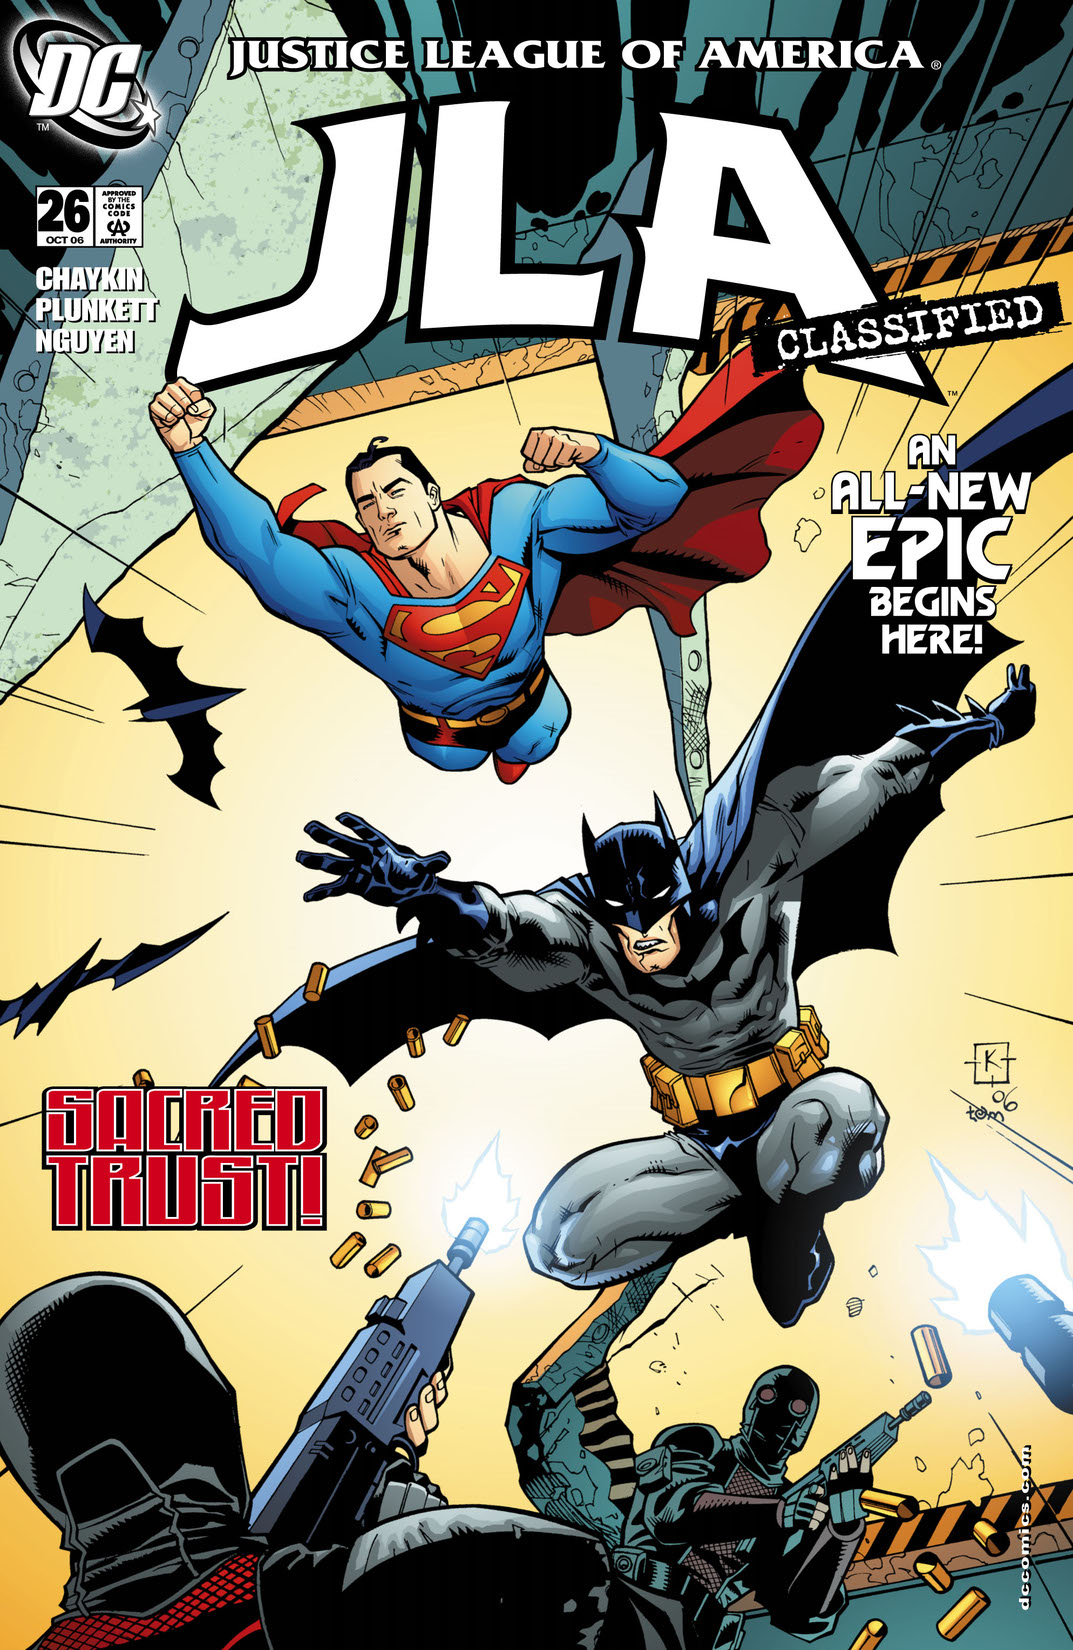 JLA: Classified #26 preview images